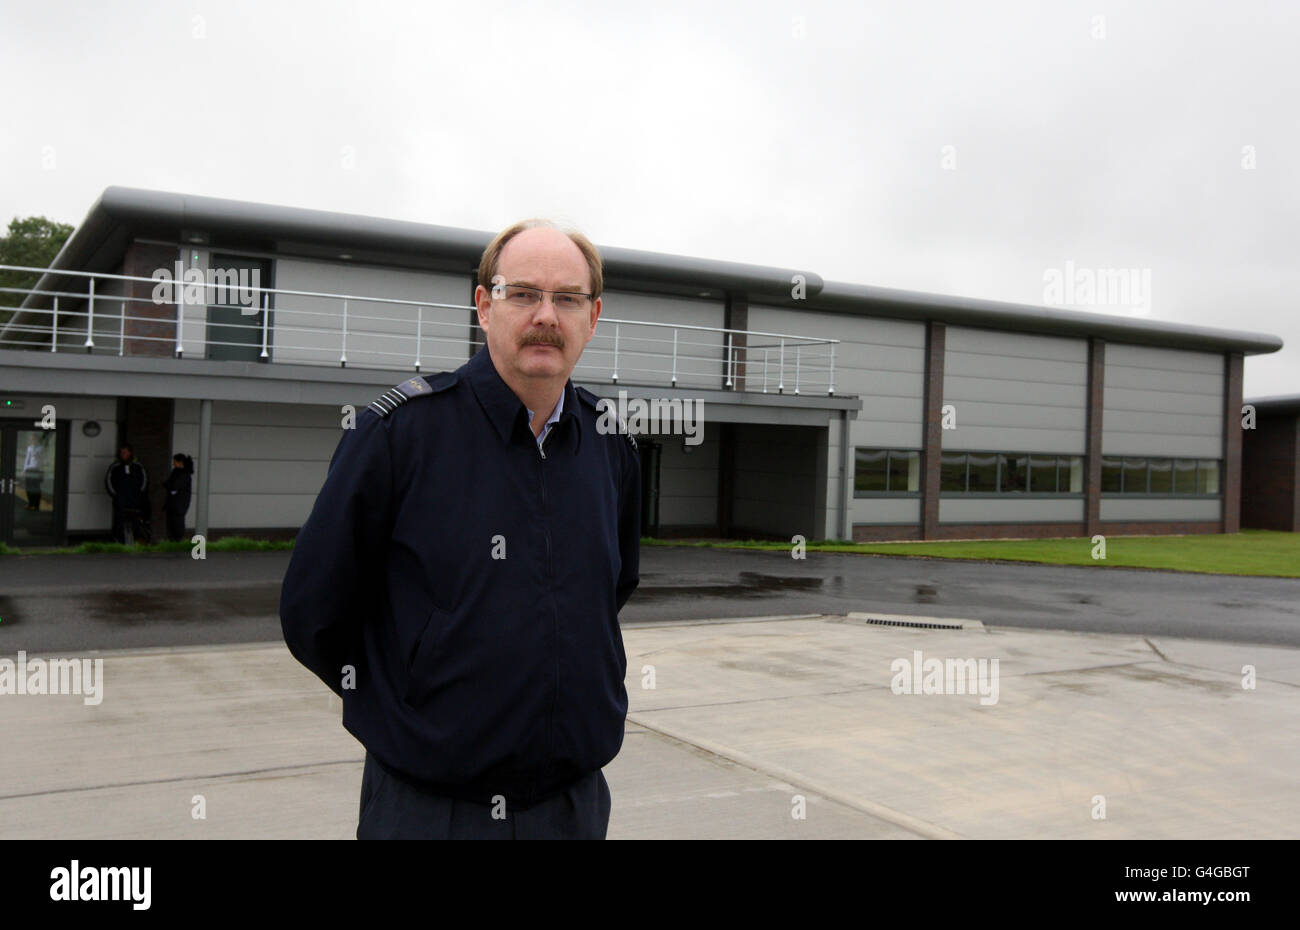 Senior Chaplin REV (wg CDR) David Edgar outside the new repatriation centre at RAF Brize Norton in Oxfordshire. The centre was built in preparation for the return of repatriations to the Oxfordshire base on September 1 as RAF Lyneham in Wiltshire closes. Stock Photo